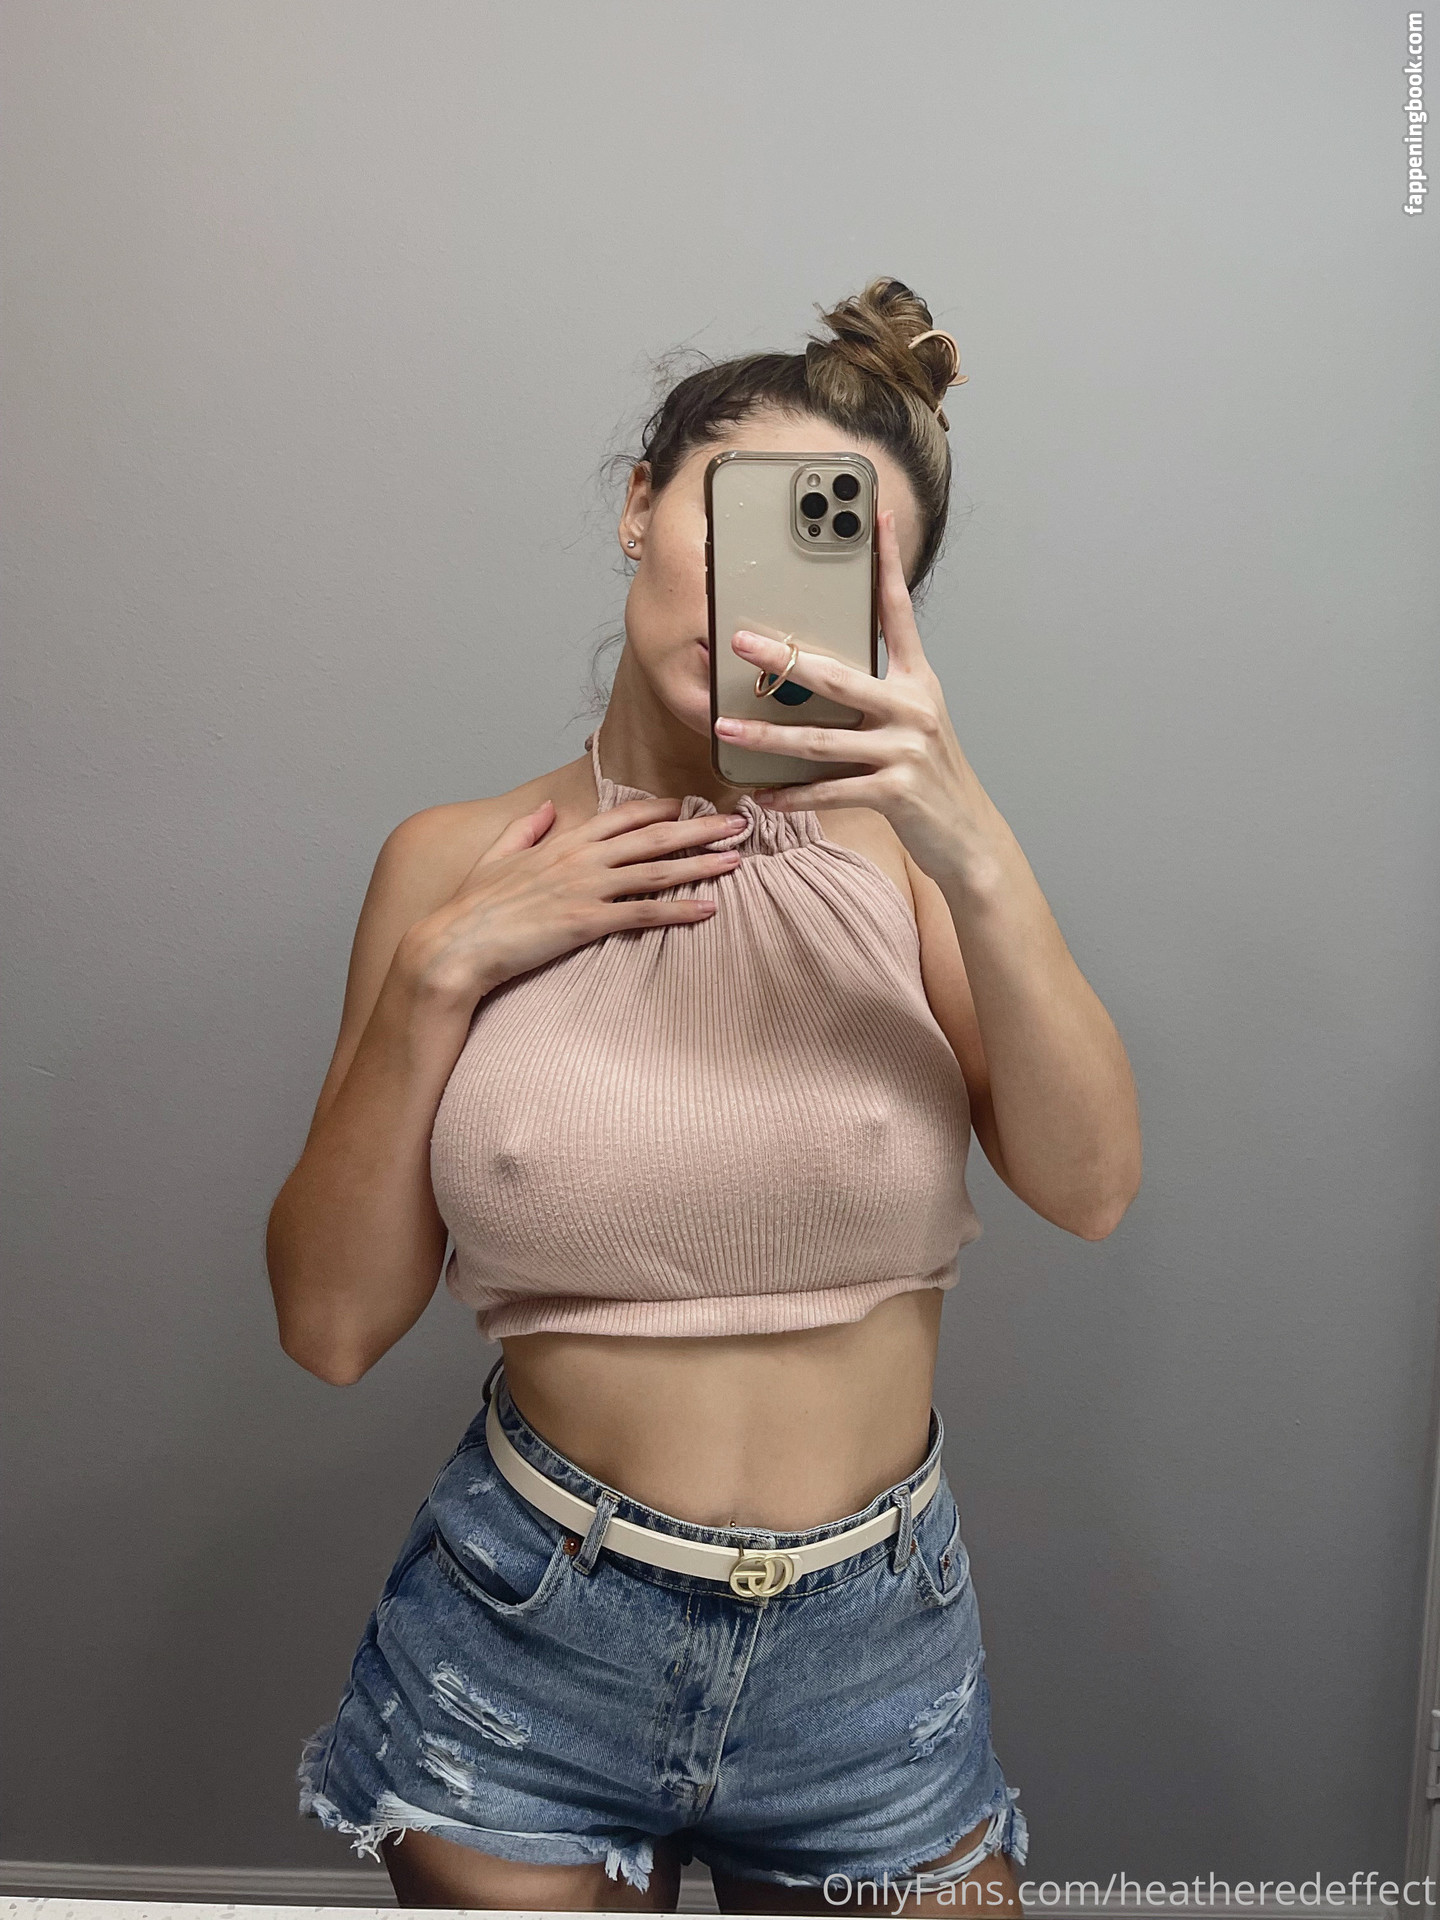 Heatheredeffect Heatheredeffect Nude Onlyfans Leaks The Fappening